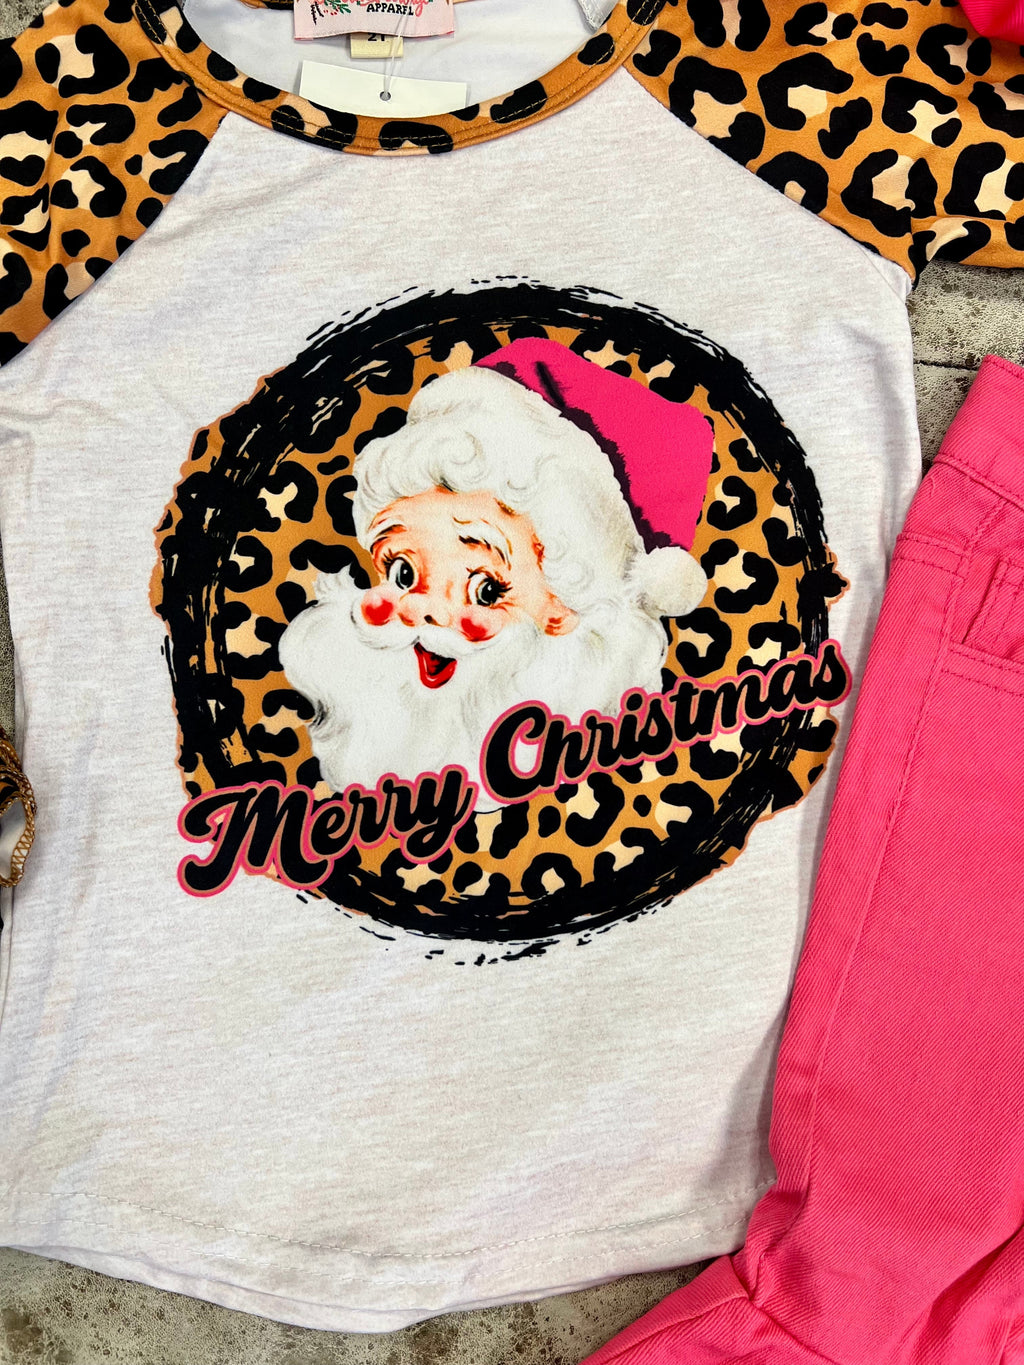 Be the talk of the town with this unique KIDS Wild Santa Top! Featuring a white raglan base, fun leopard sleeves, and a Santa Claus graphic, this tee is sure to be a hit. With the words "Merry Christmas" and a ruffled sleeve, you'll be festive and funny! ! Ho-Ho-Holy Raglan Time! 95% Cotton 5% Spandex